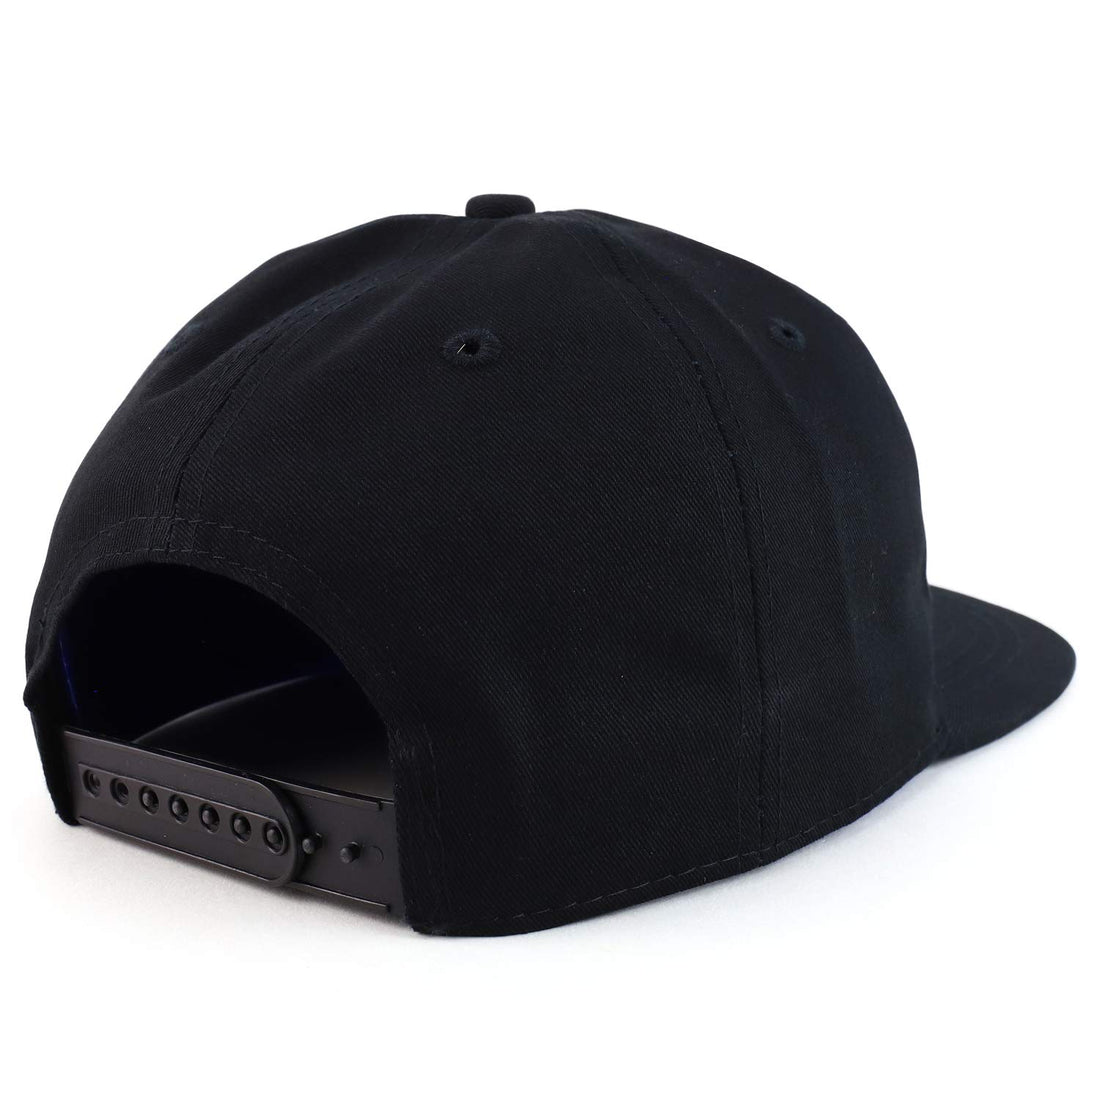 Trendy Apparel Shop Orca Killer Whale Embroidered Low Profile Snapback Cap